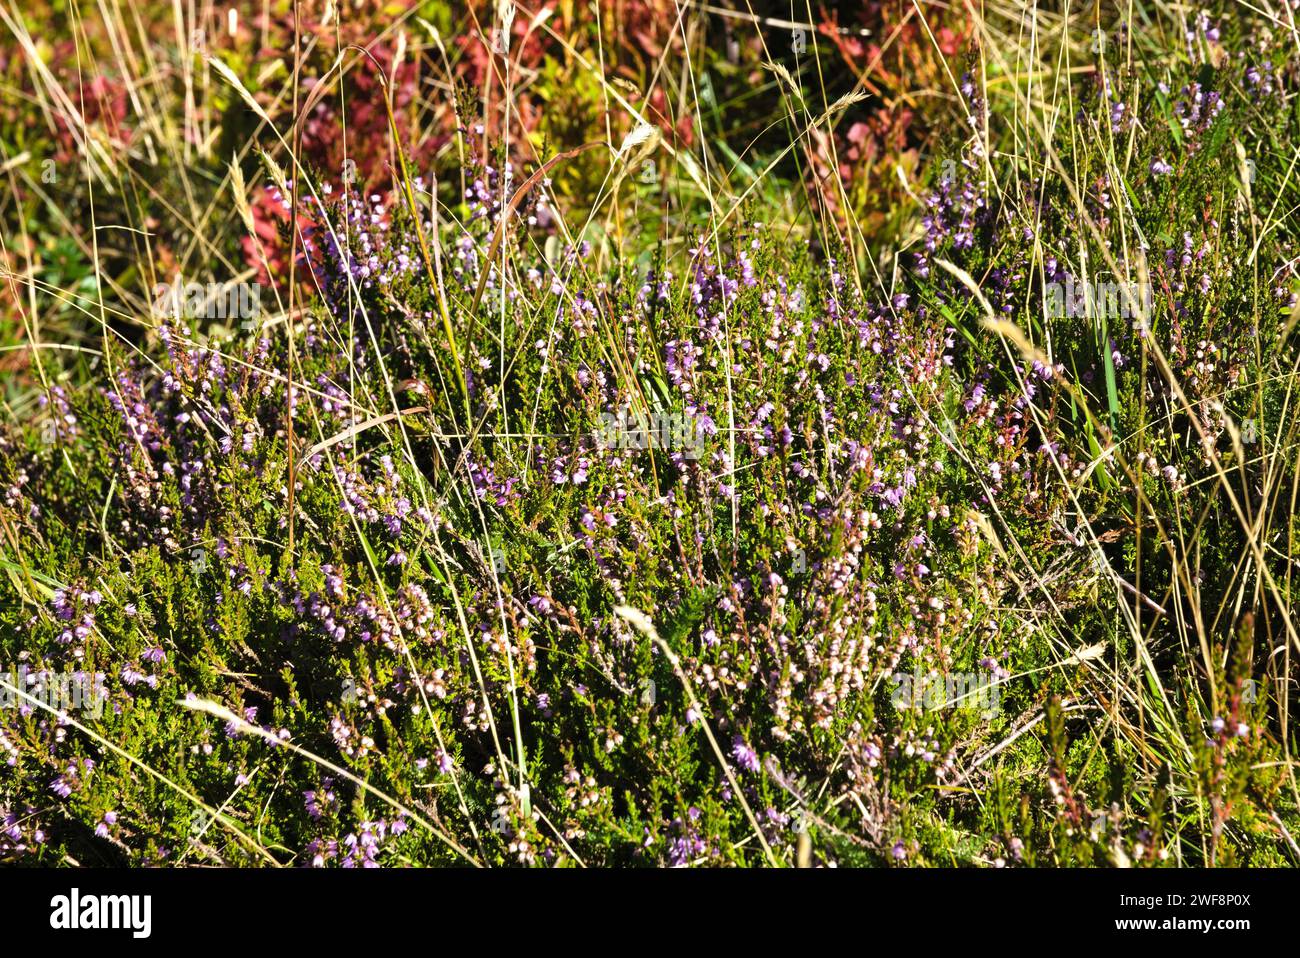 Real Heather, Also Called Erica In The Wild - Broom Heath Stock Photo